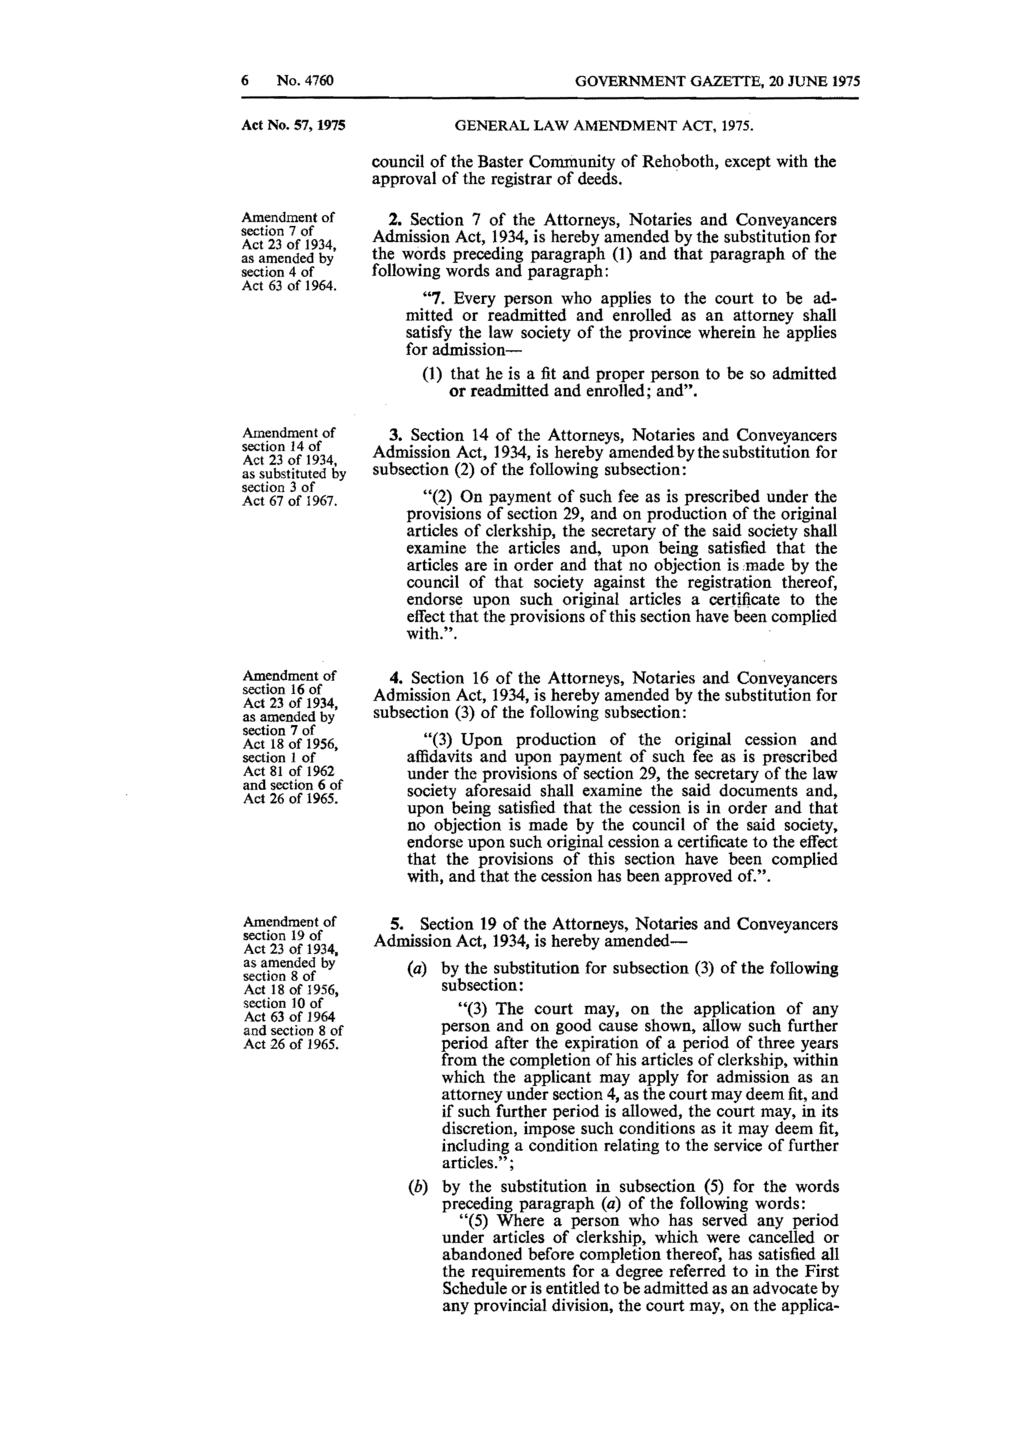 6 No. 4760 GOVERNMENT GAZETTE, 20 JUNE 1975 Act No. 57, 1975 GENERAL LAW AMENDMENT ACT, 1975. council of the Baster Community of Rehoboth, except with the approval of the registrar of deeds.